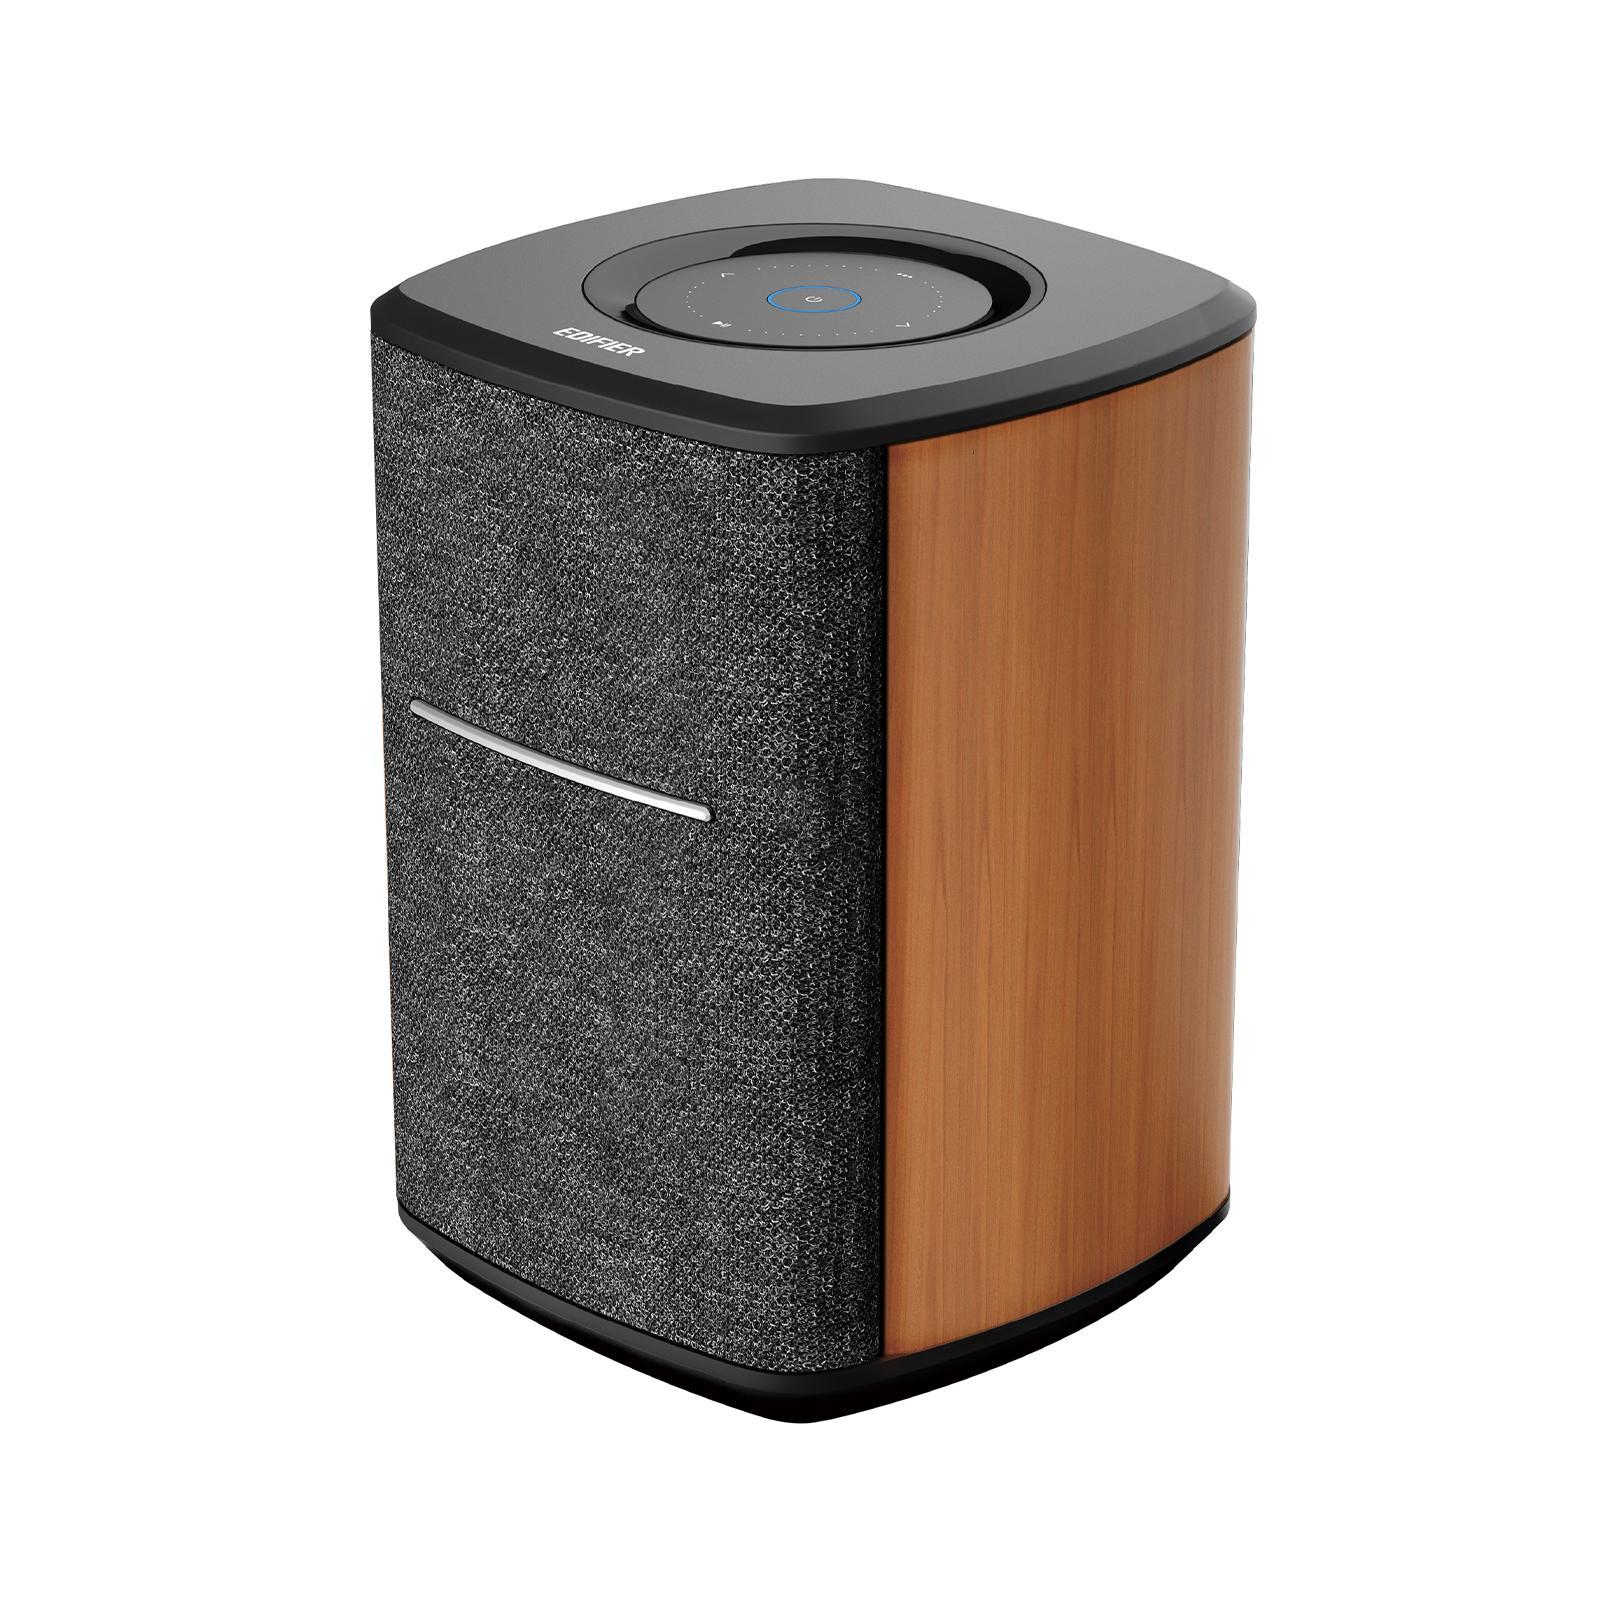 Edifier Wifi Smart Speaker without Microphone, works with Alexa, supports AirPlay 2, Spotify,TIDAL CONNECT, 40W RMS One-Piece Wi-Fi and Bluetooth Sound System, No Mic MS50A